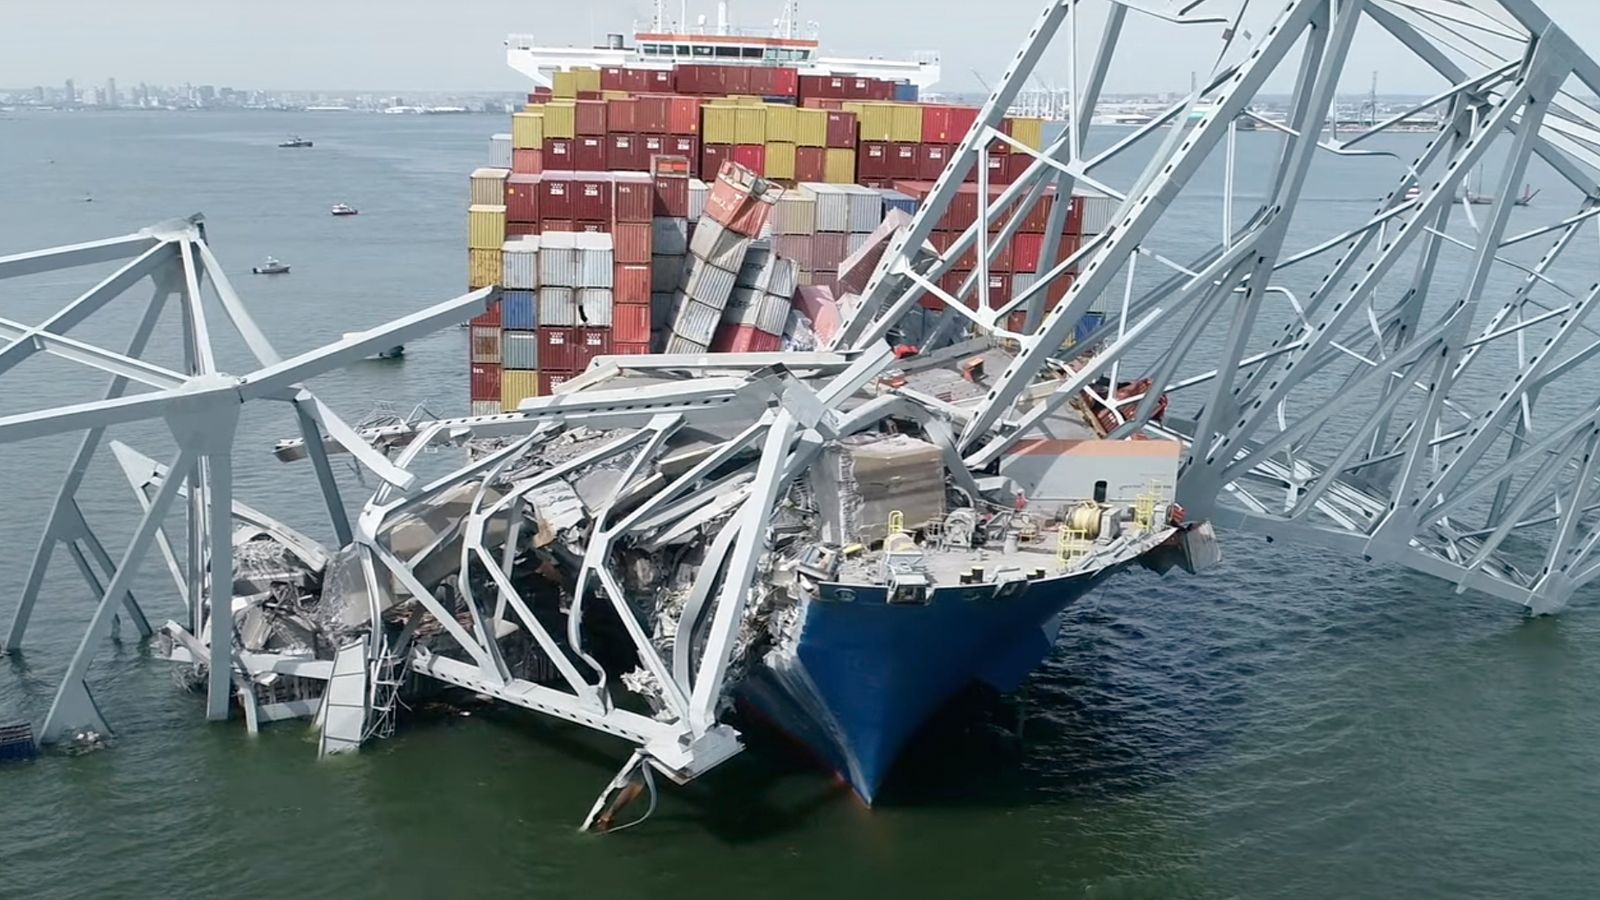 Pilot dropped port anchor in bid to swing ship away from Baltimore bridge, officials say